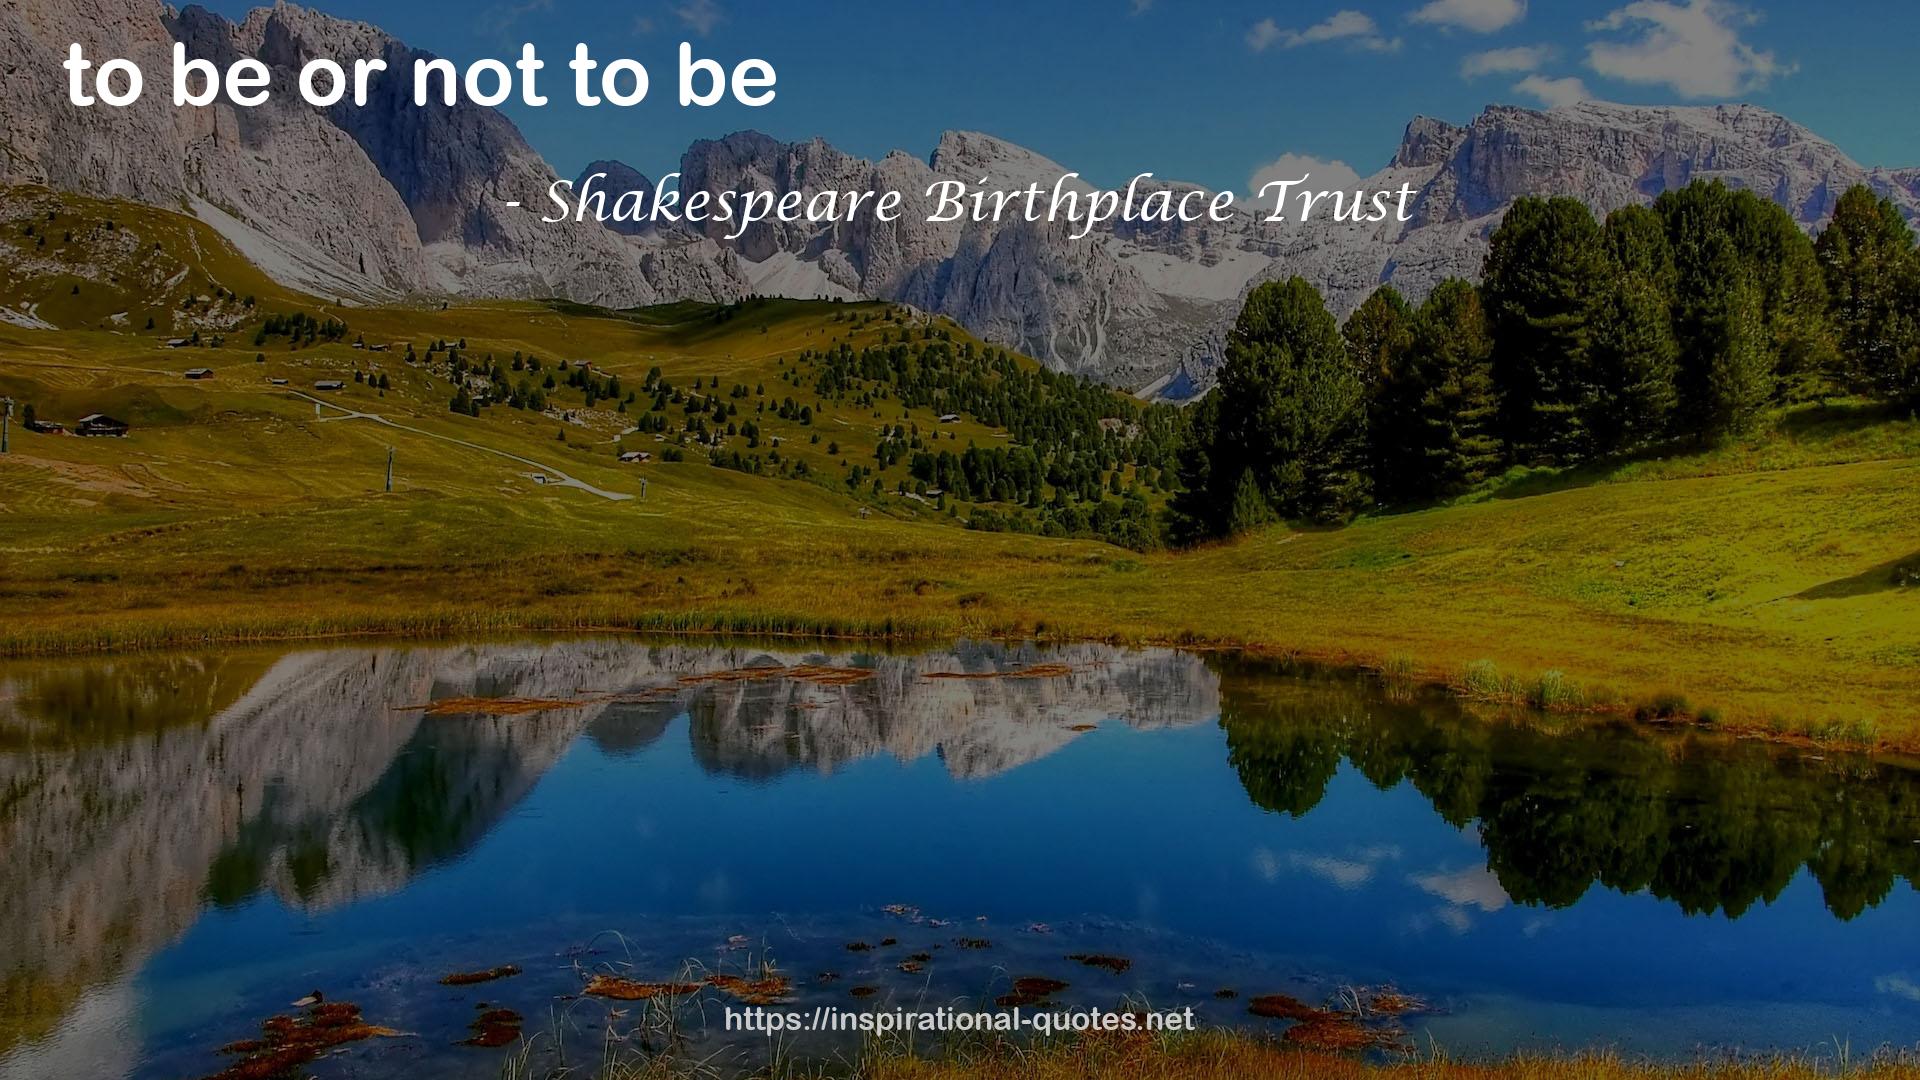 Shakespeare Birthplace Trust QUOTES